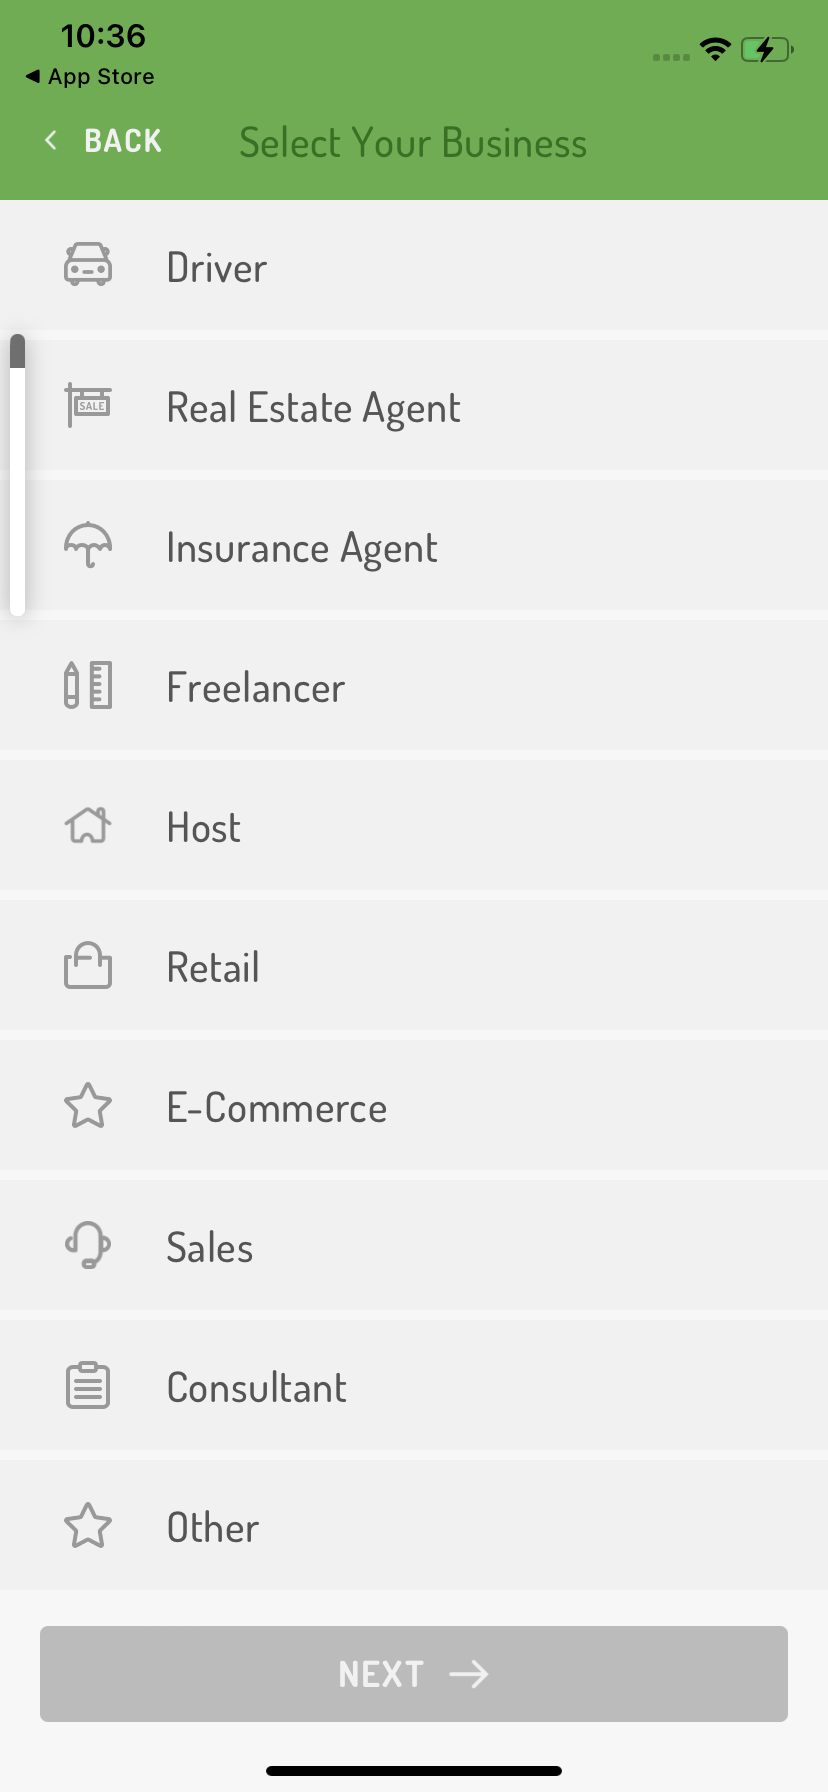 hurdlr lets you select the business profile you want to track